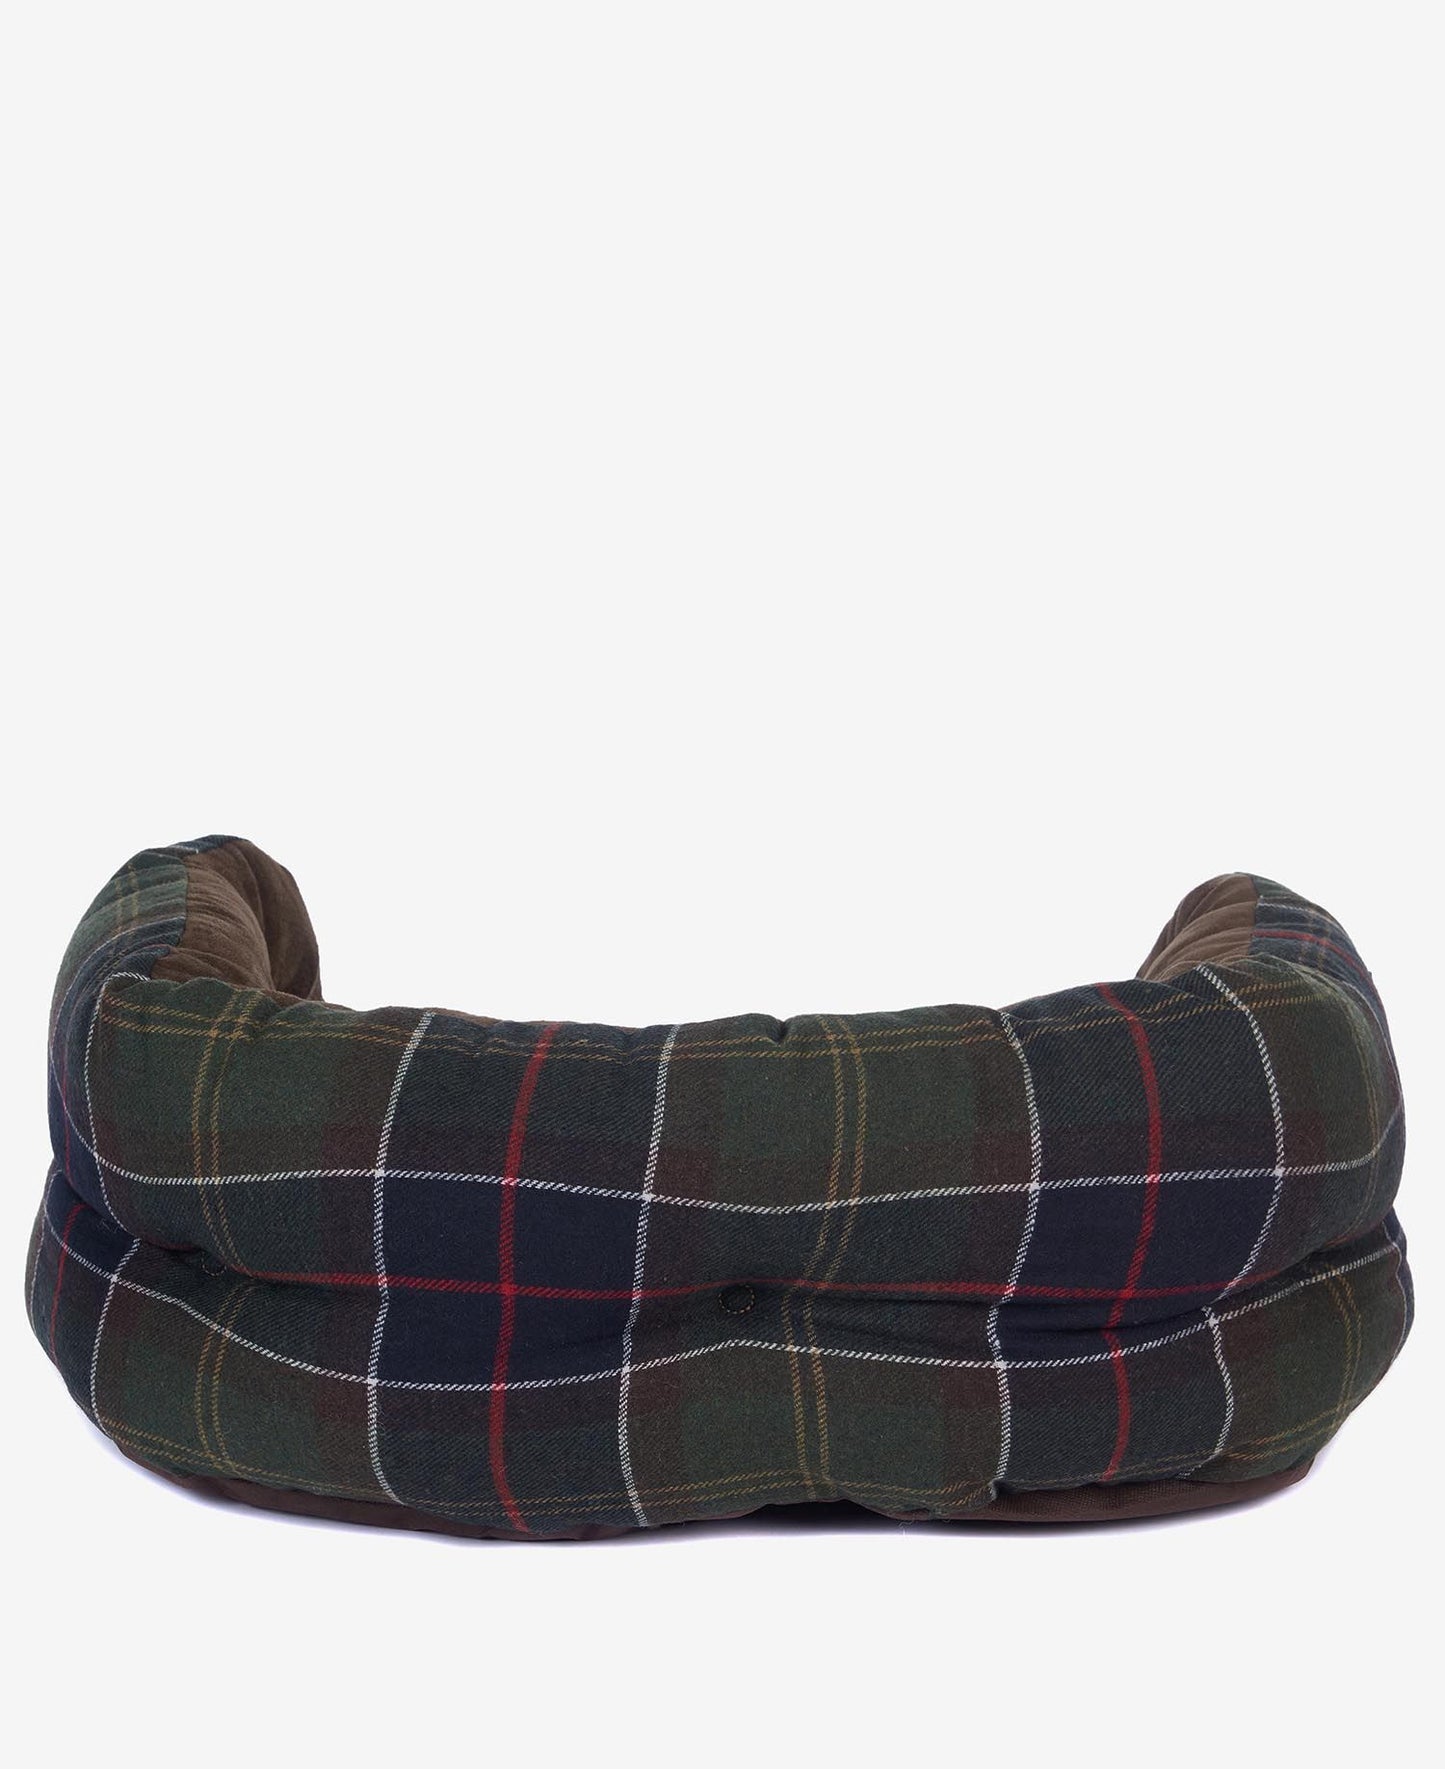 BARBOUR - Dog Bed